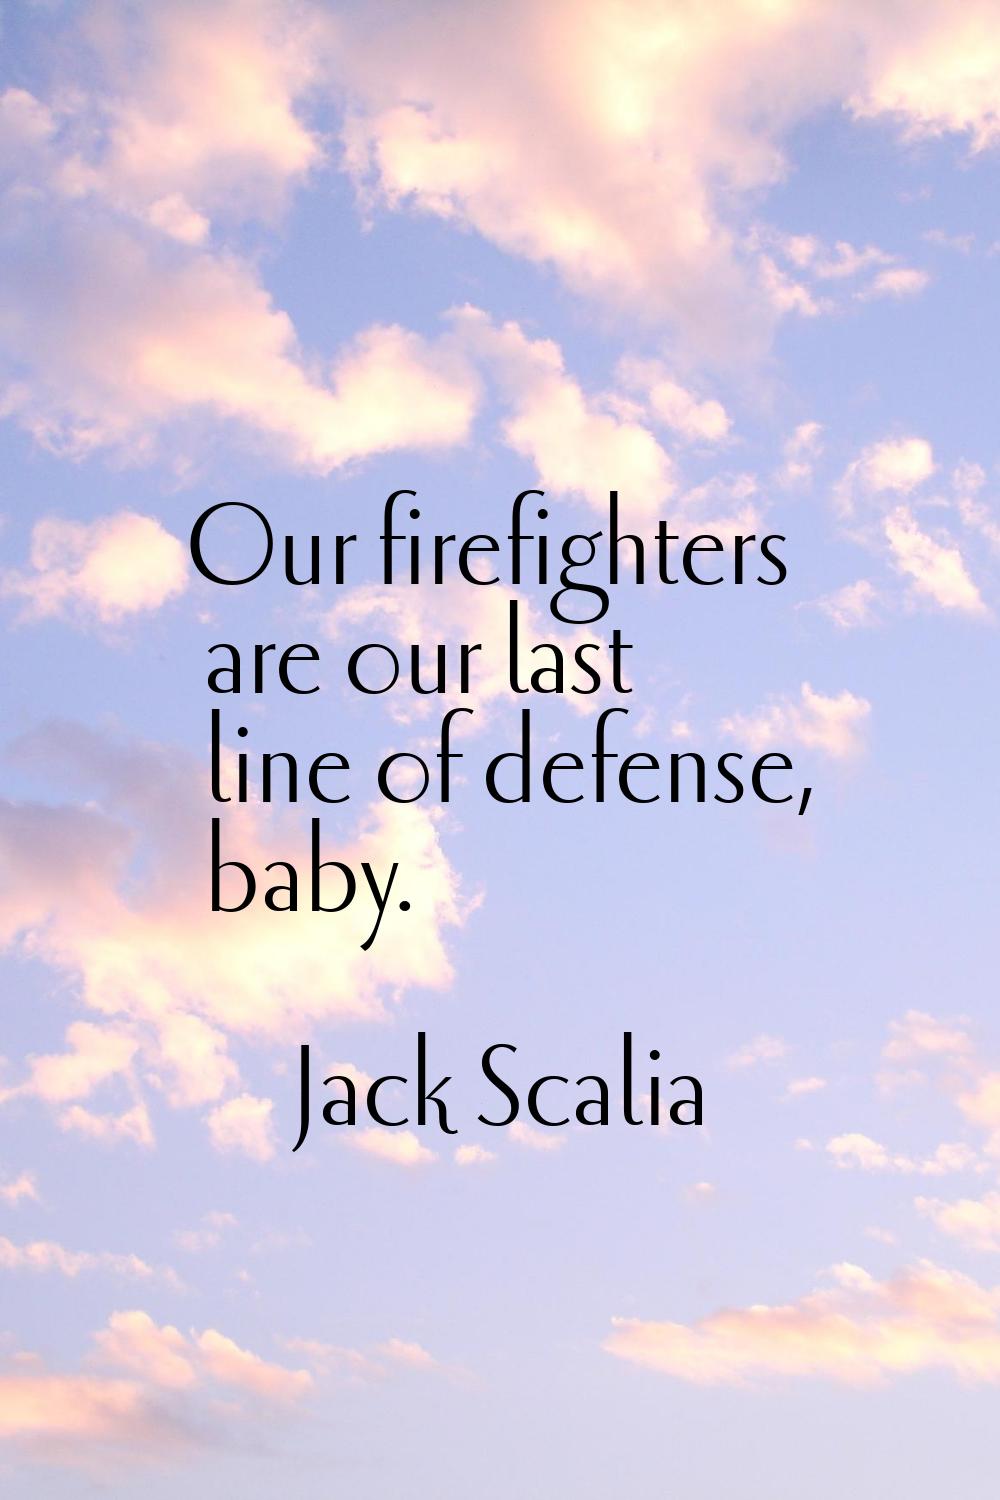 Our firefighters are our last line of defense, baby.